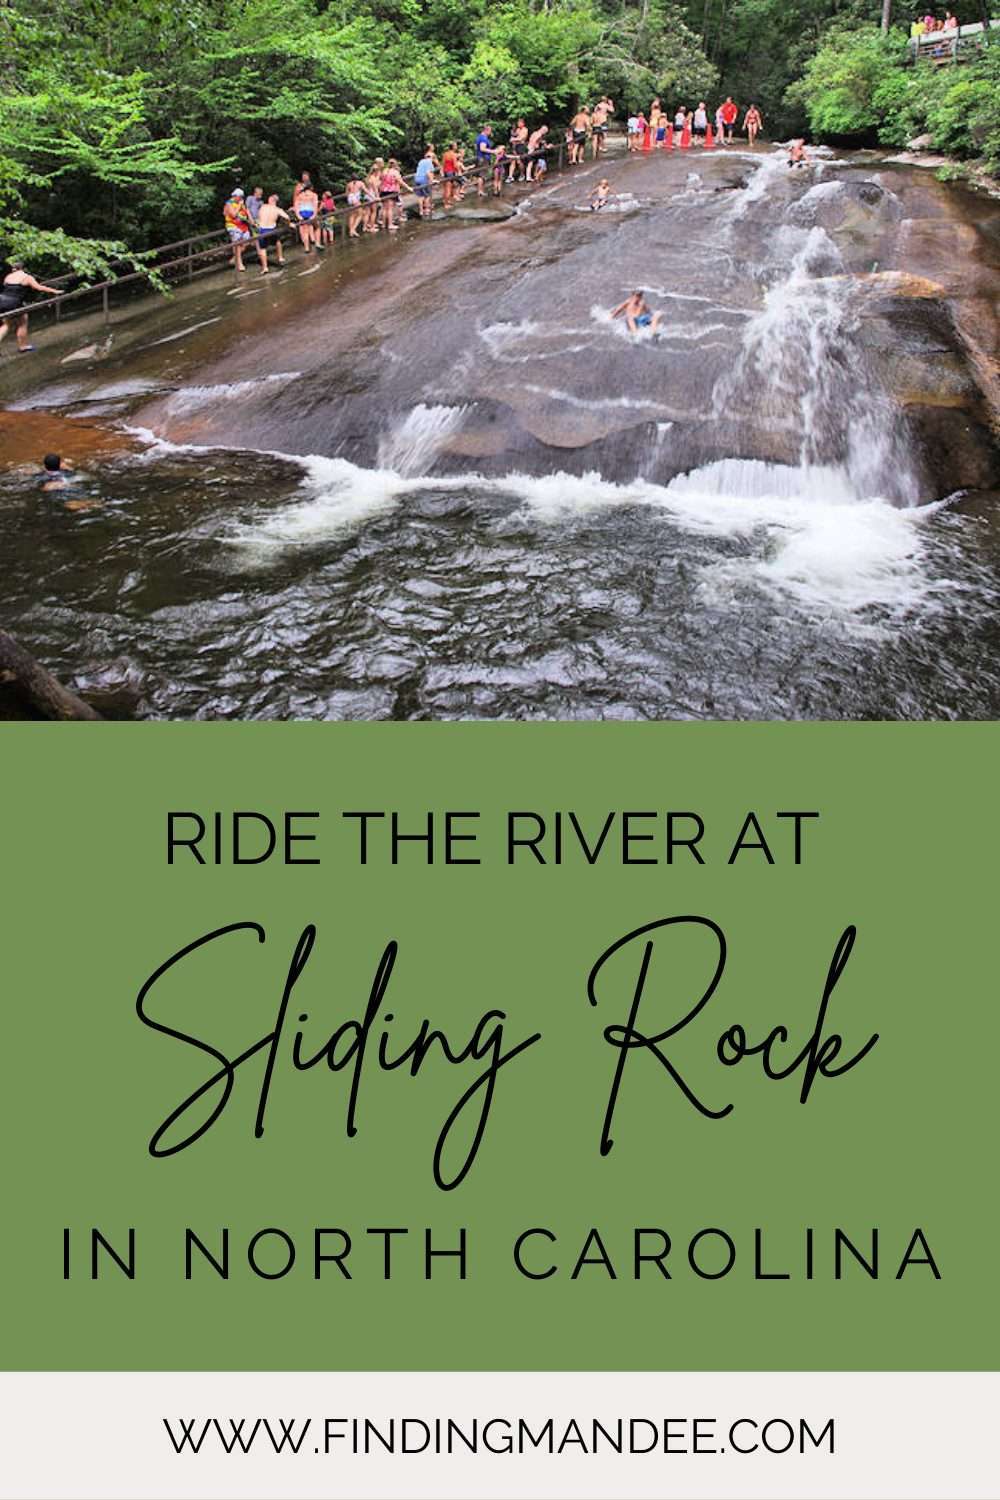 Ride the River at Sliding Rock in North Carolina | Finding Mandee